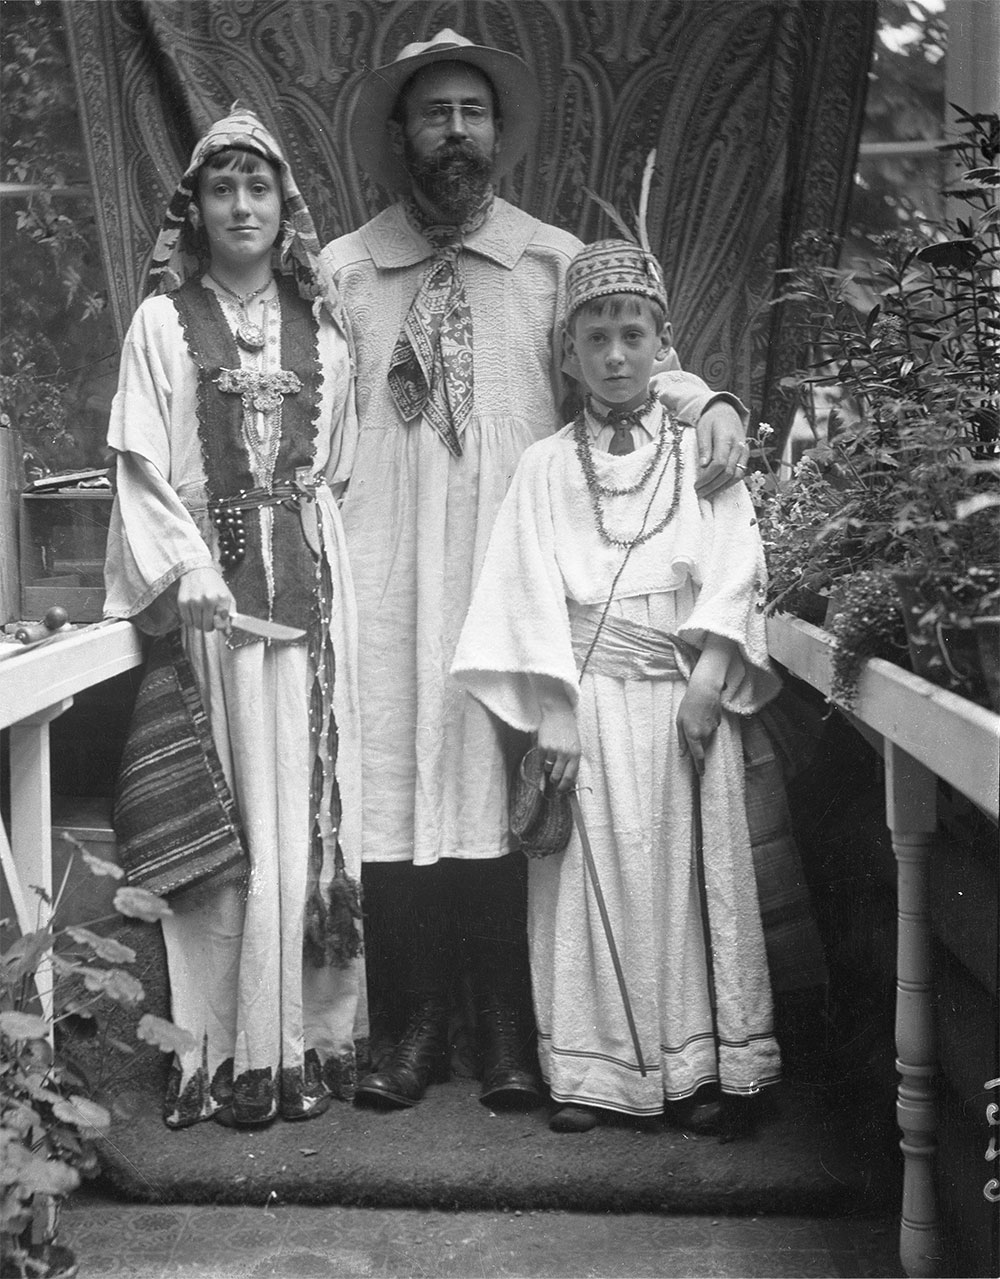 (2) Family portrait with Prof. John L. Myres and his two sons, one donning a Rhodian robe now in the Ashmolean Museum (EA1960.106), Oxford 1912. School of Archaeology, University of Oxford, HEIR image 33956